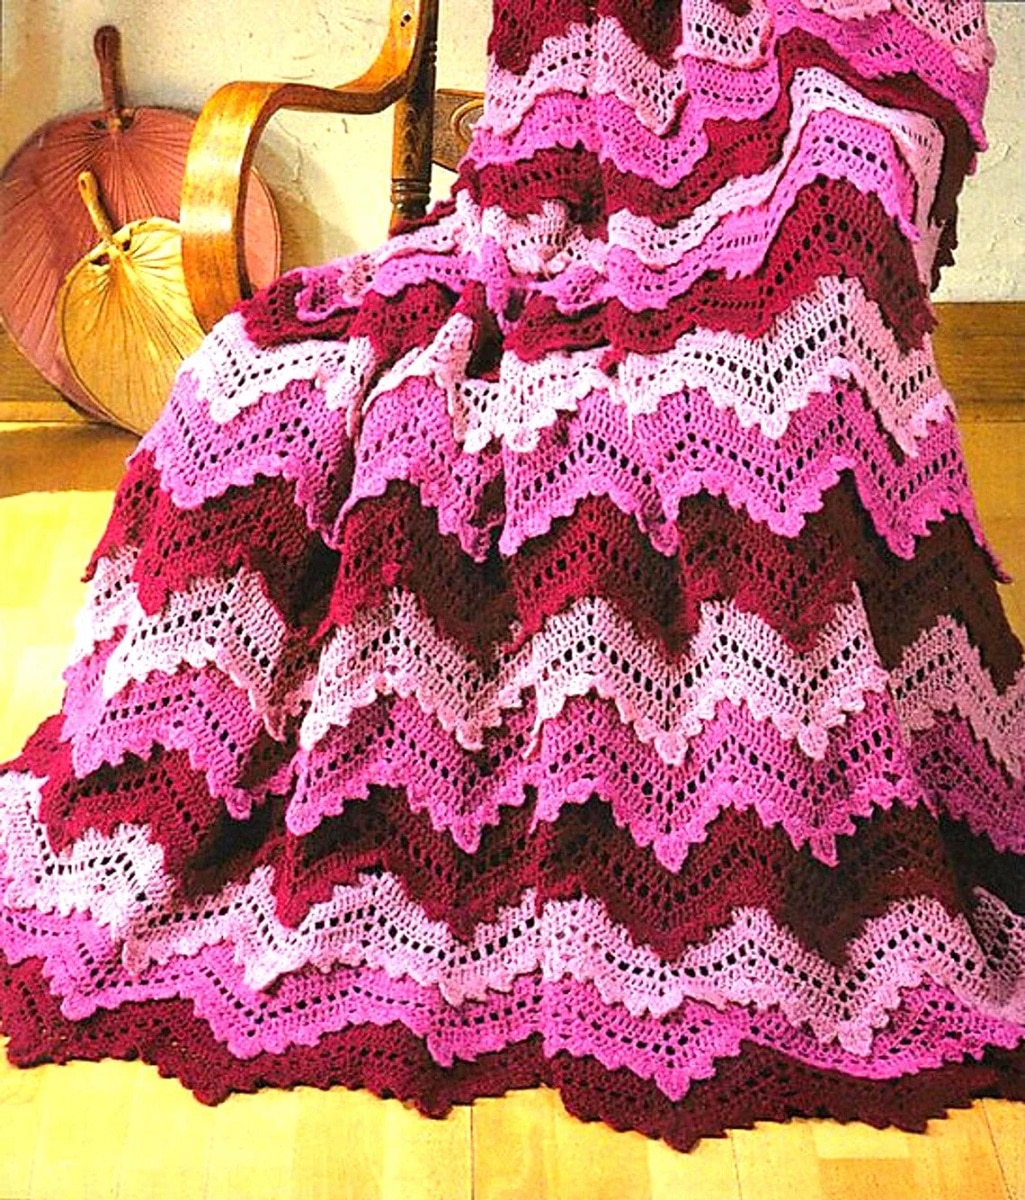 Lace style purple, pink, and red ripple crochet afghan draped over a wooden chair, falling onto wooden flooring.